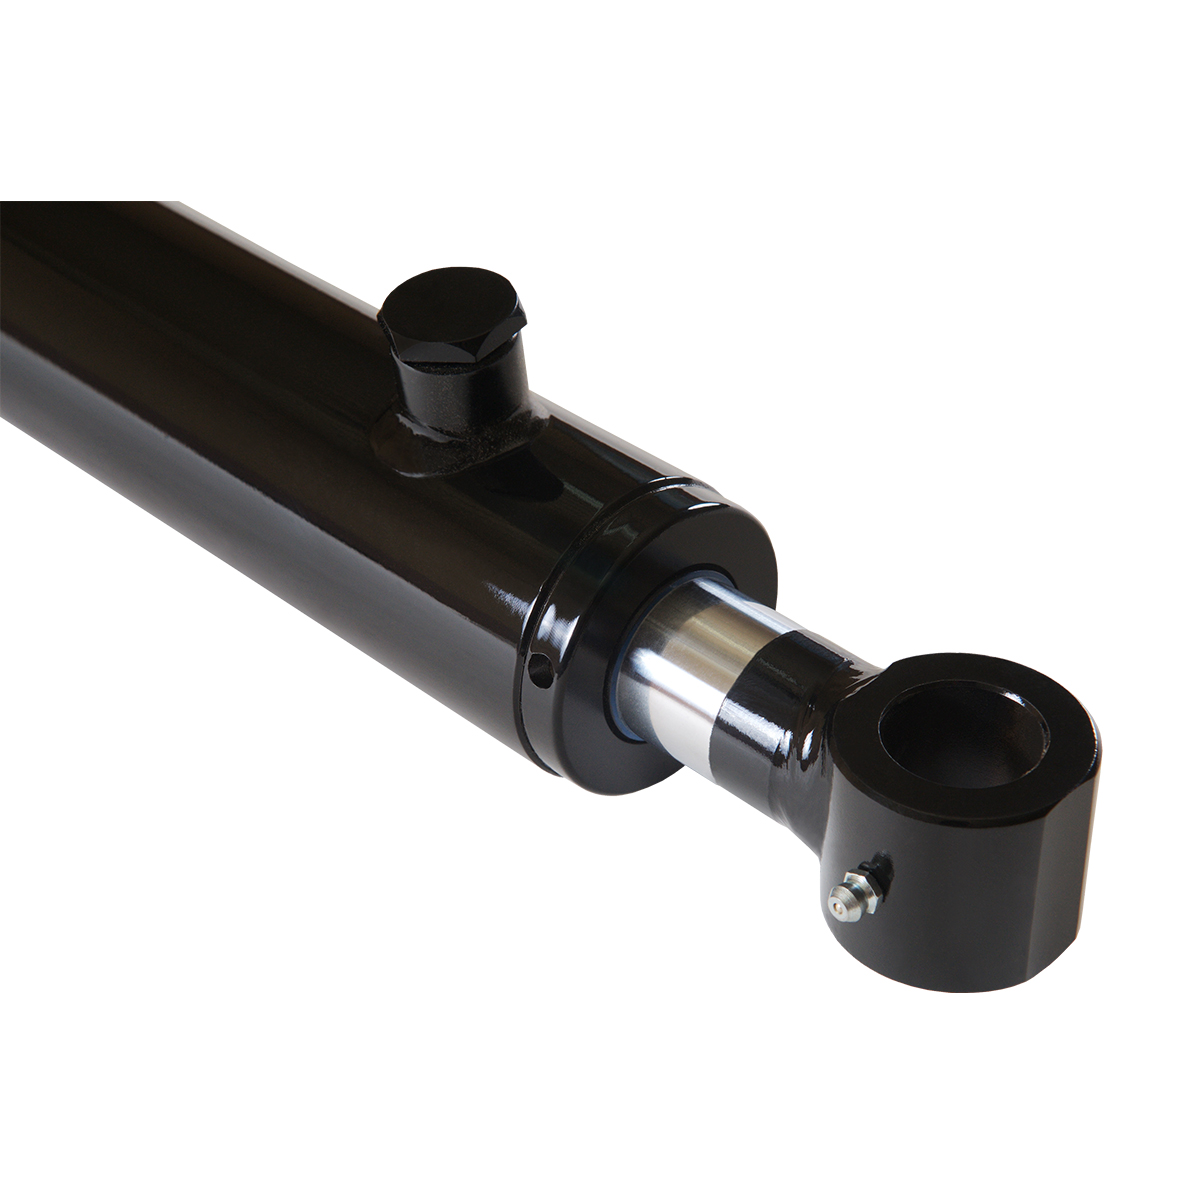 2 bore x 14 stroke hydraulic cylinder, welded tang double acting cylinder | Magister Hydraulics